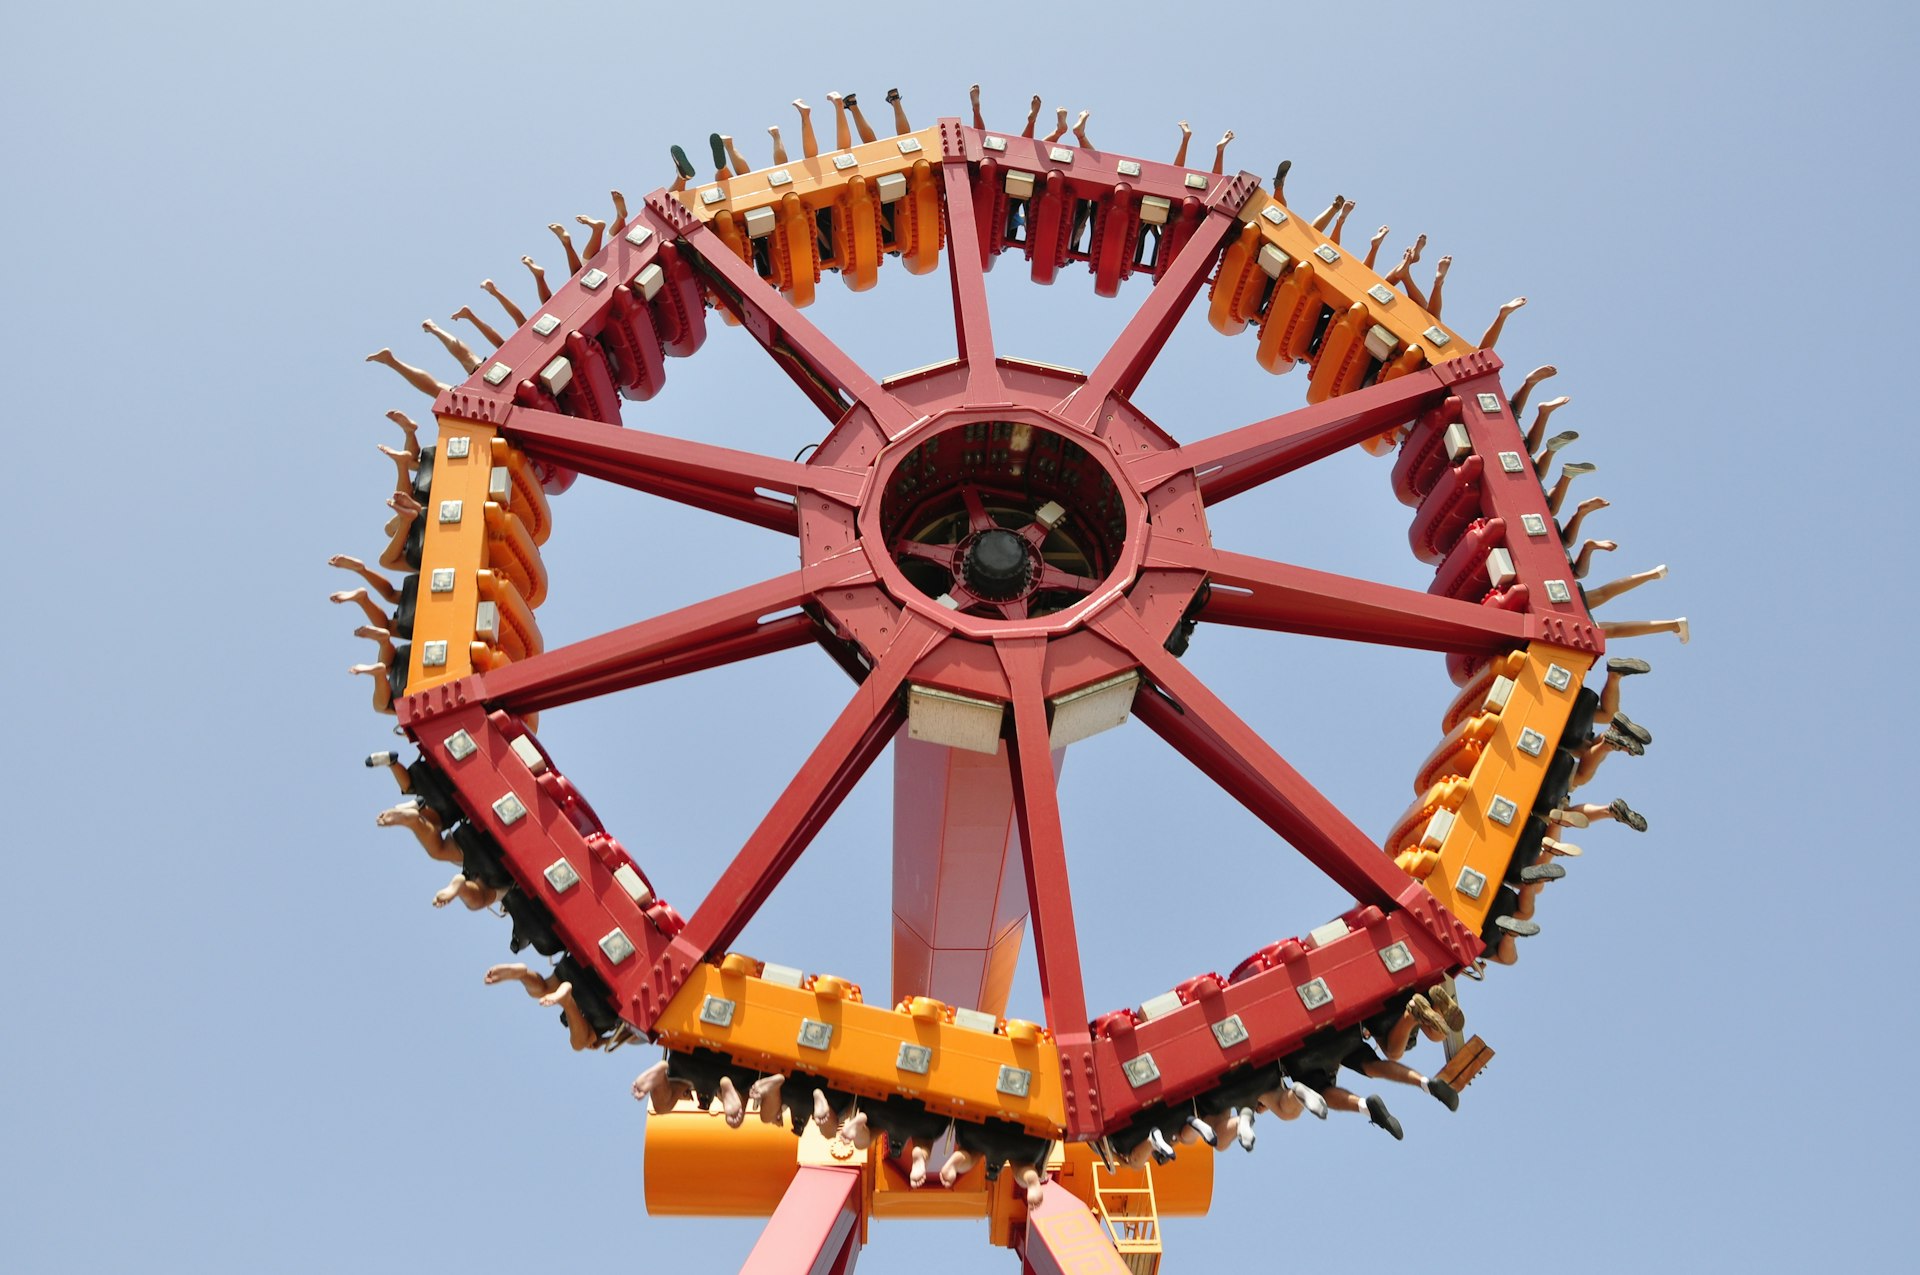 Parkgoers feet hanging from a circular ride in the air at Terra Mitica amusement park in Benidorm, Spain